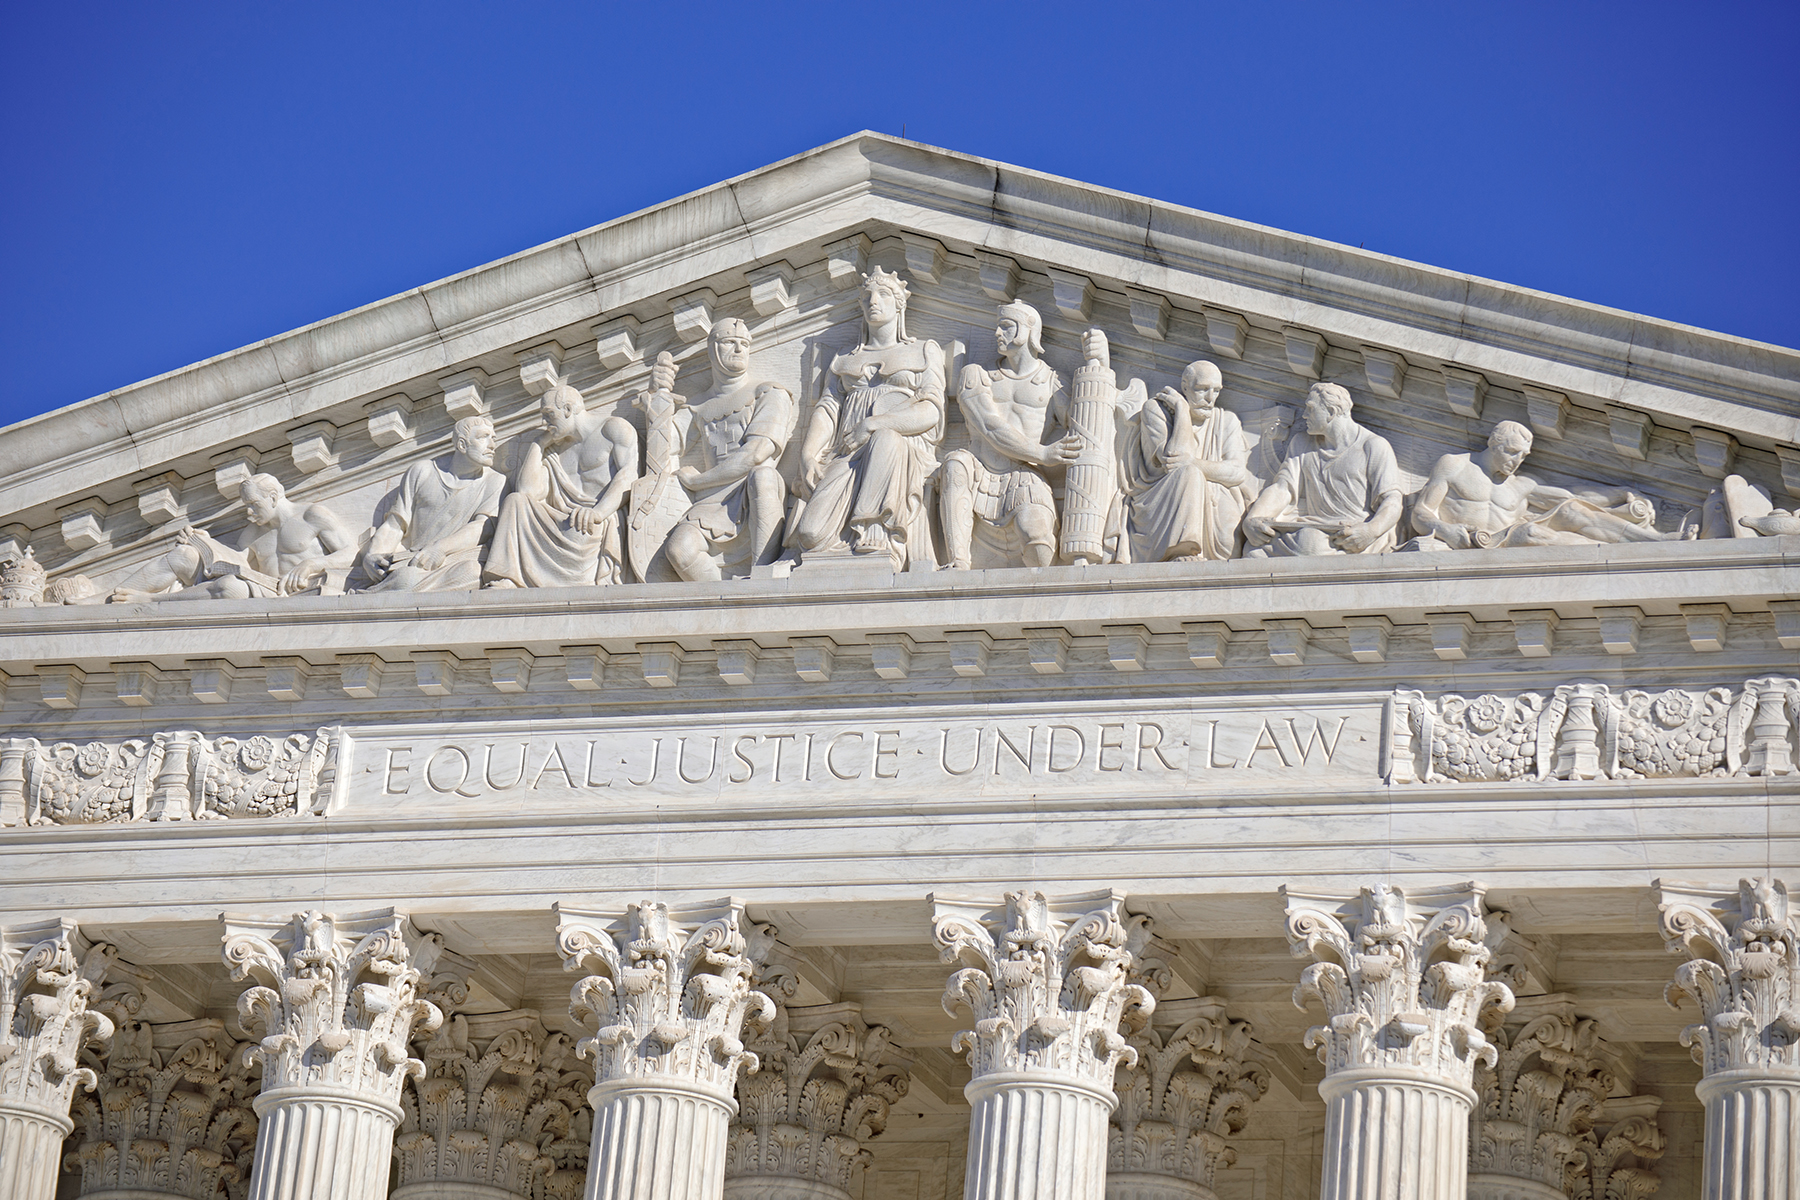 West Pediment marble sculptural group on the U.S. Supreme Court building exterior in Washington DC, completed by artist Robert I. Aitken in 1935